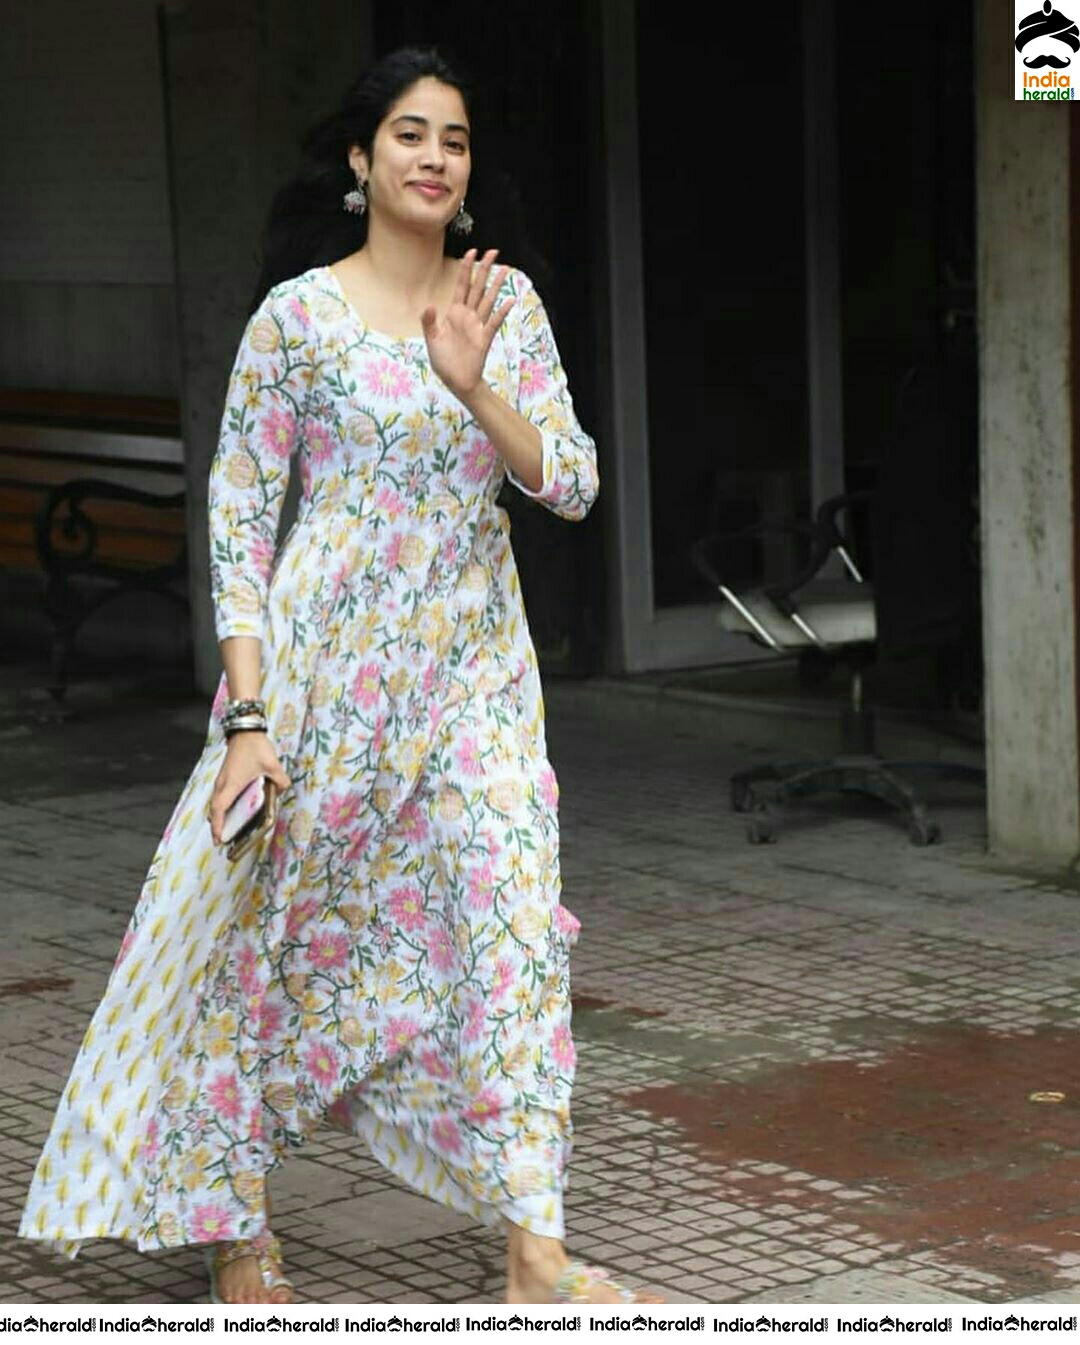 Jahnvi Spotted In A Long Floral Print Frock At Juhu